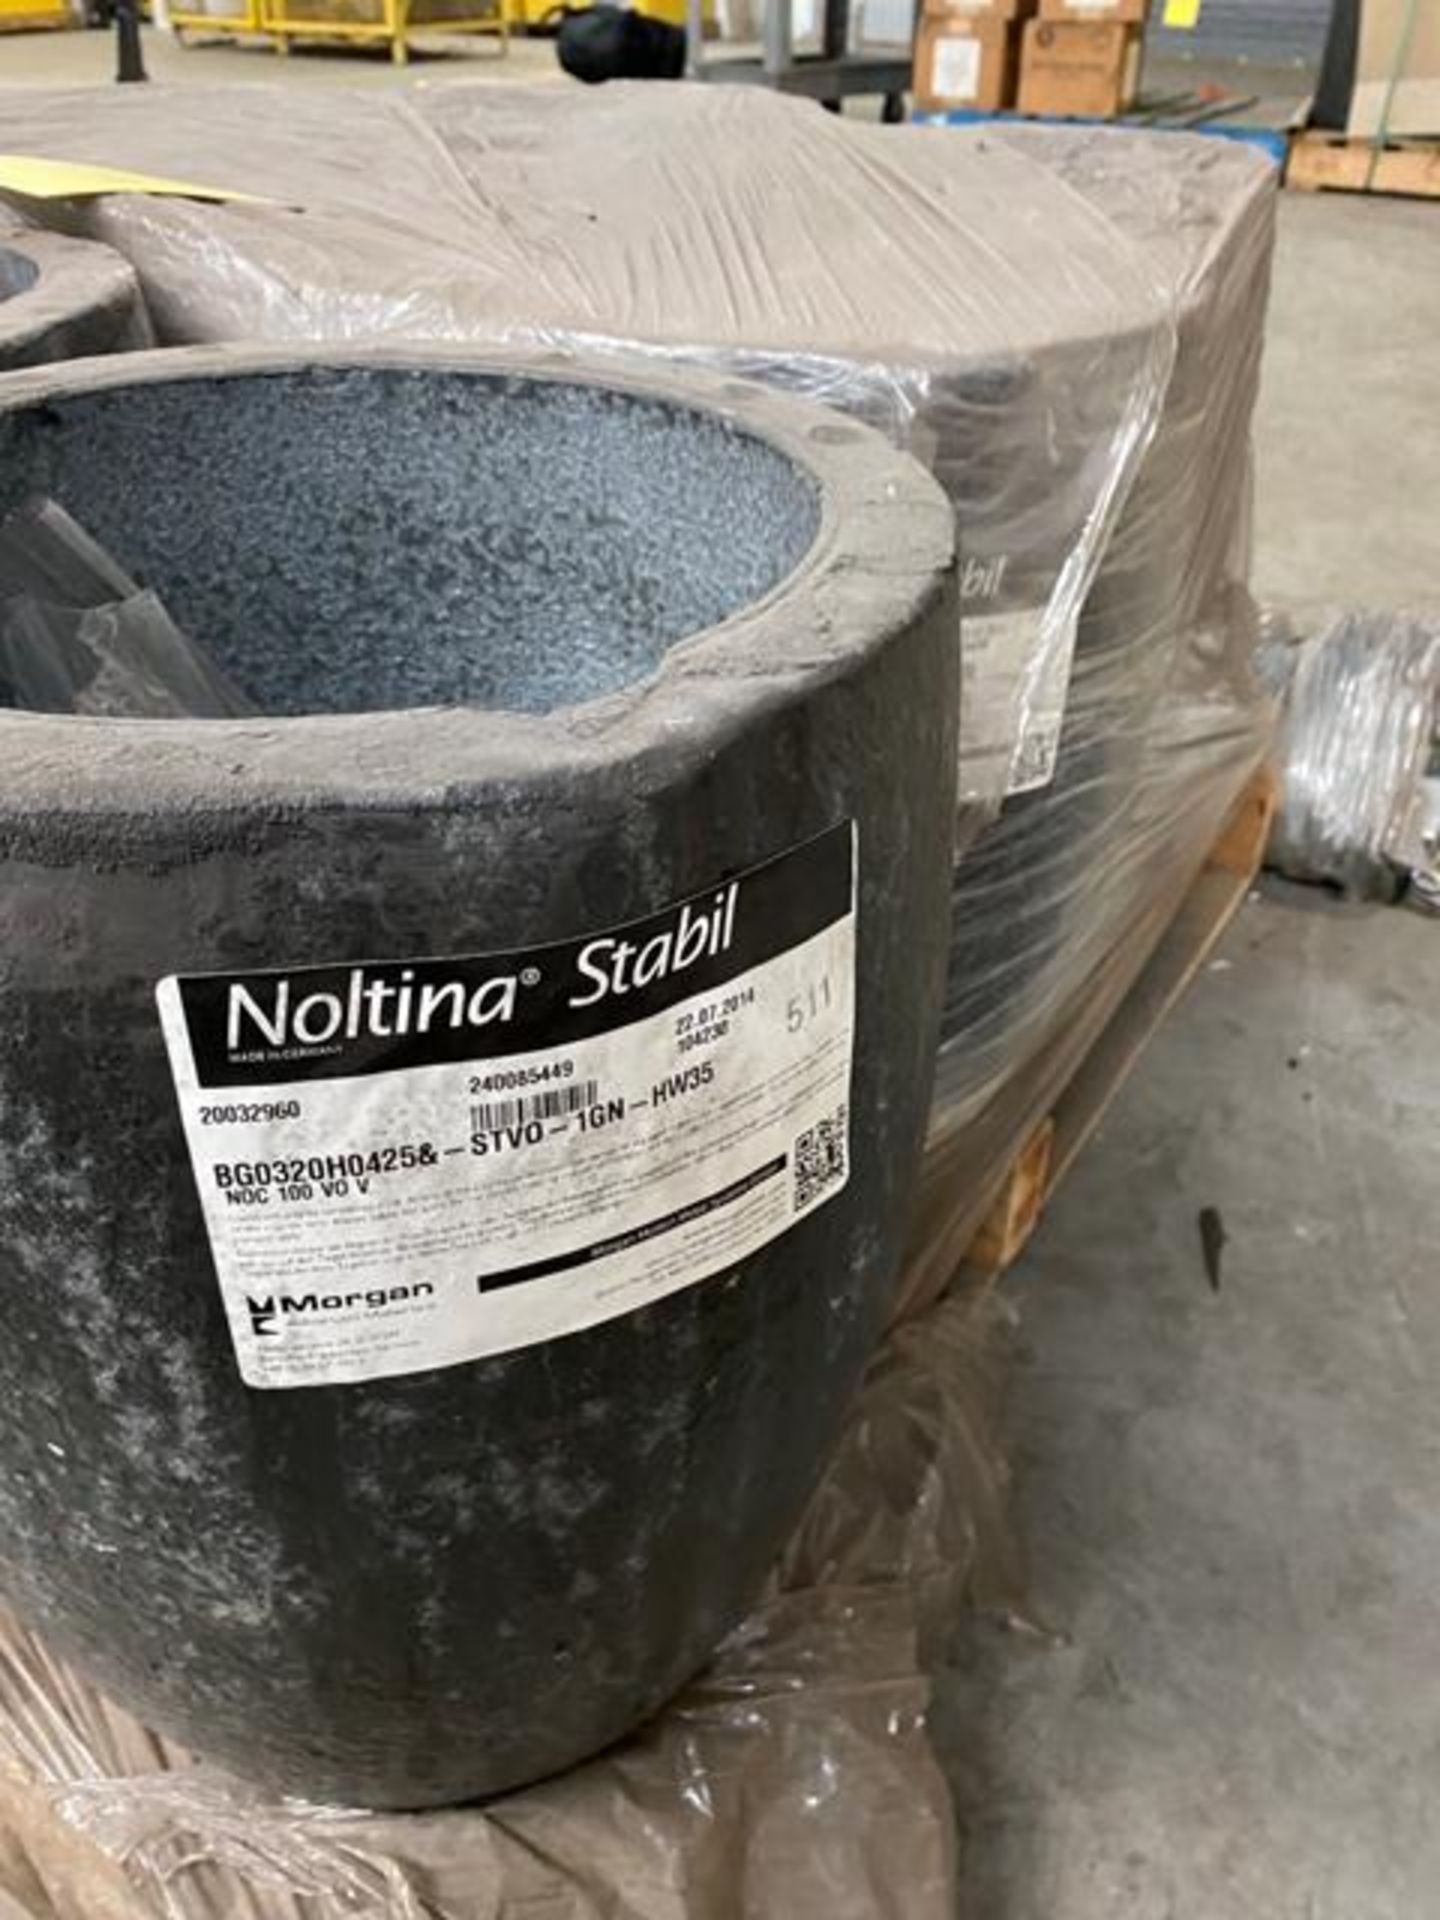 Pallet of Noltina Stabil Crucibles Rigging Price $25 - Image 2 of 3